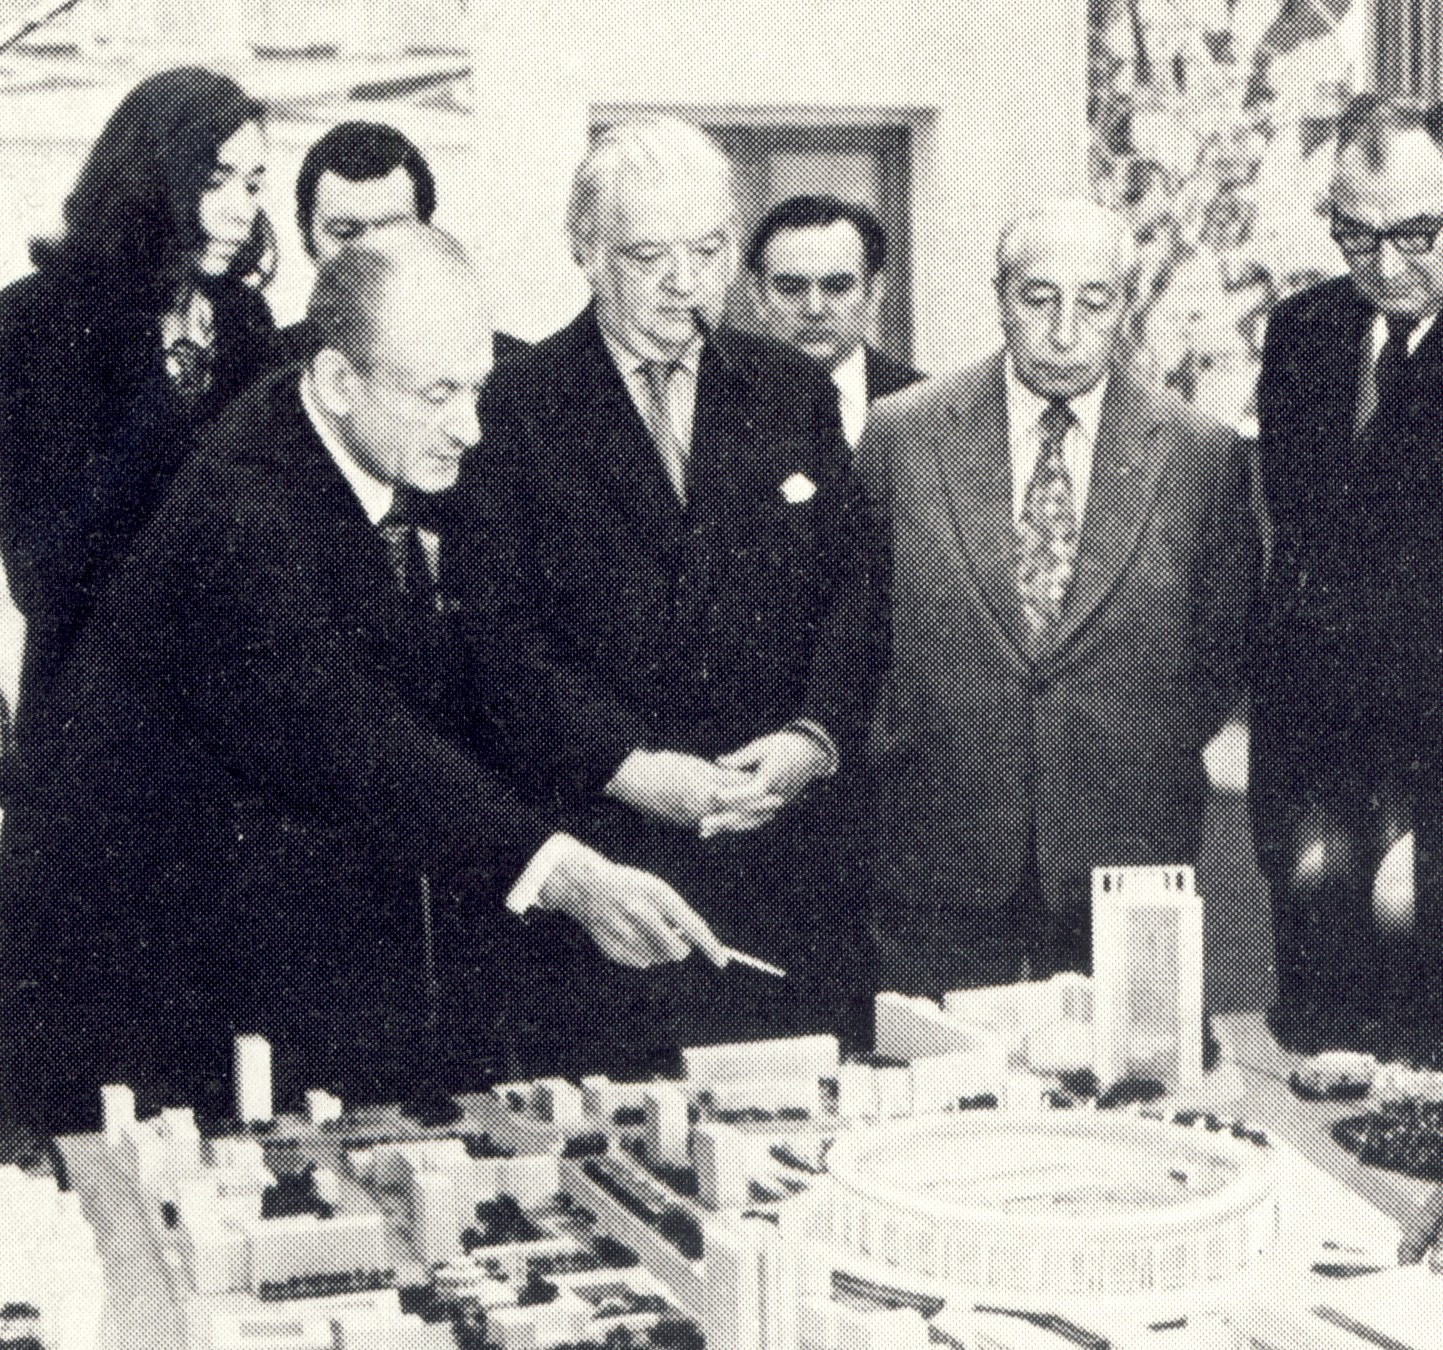 Lord Killanin, centre, inspects a model ahead of Moscow 1980 ©Olympic Panorama